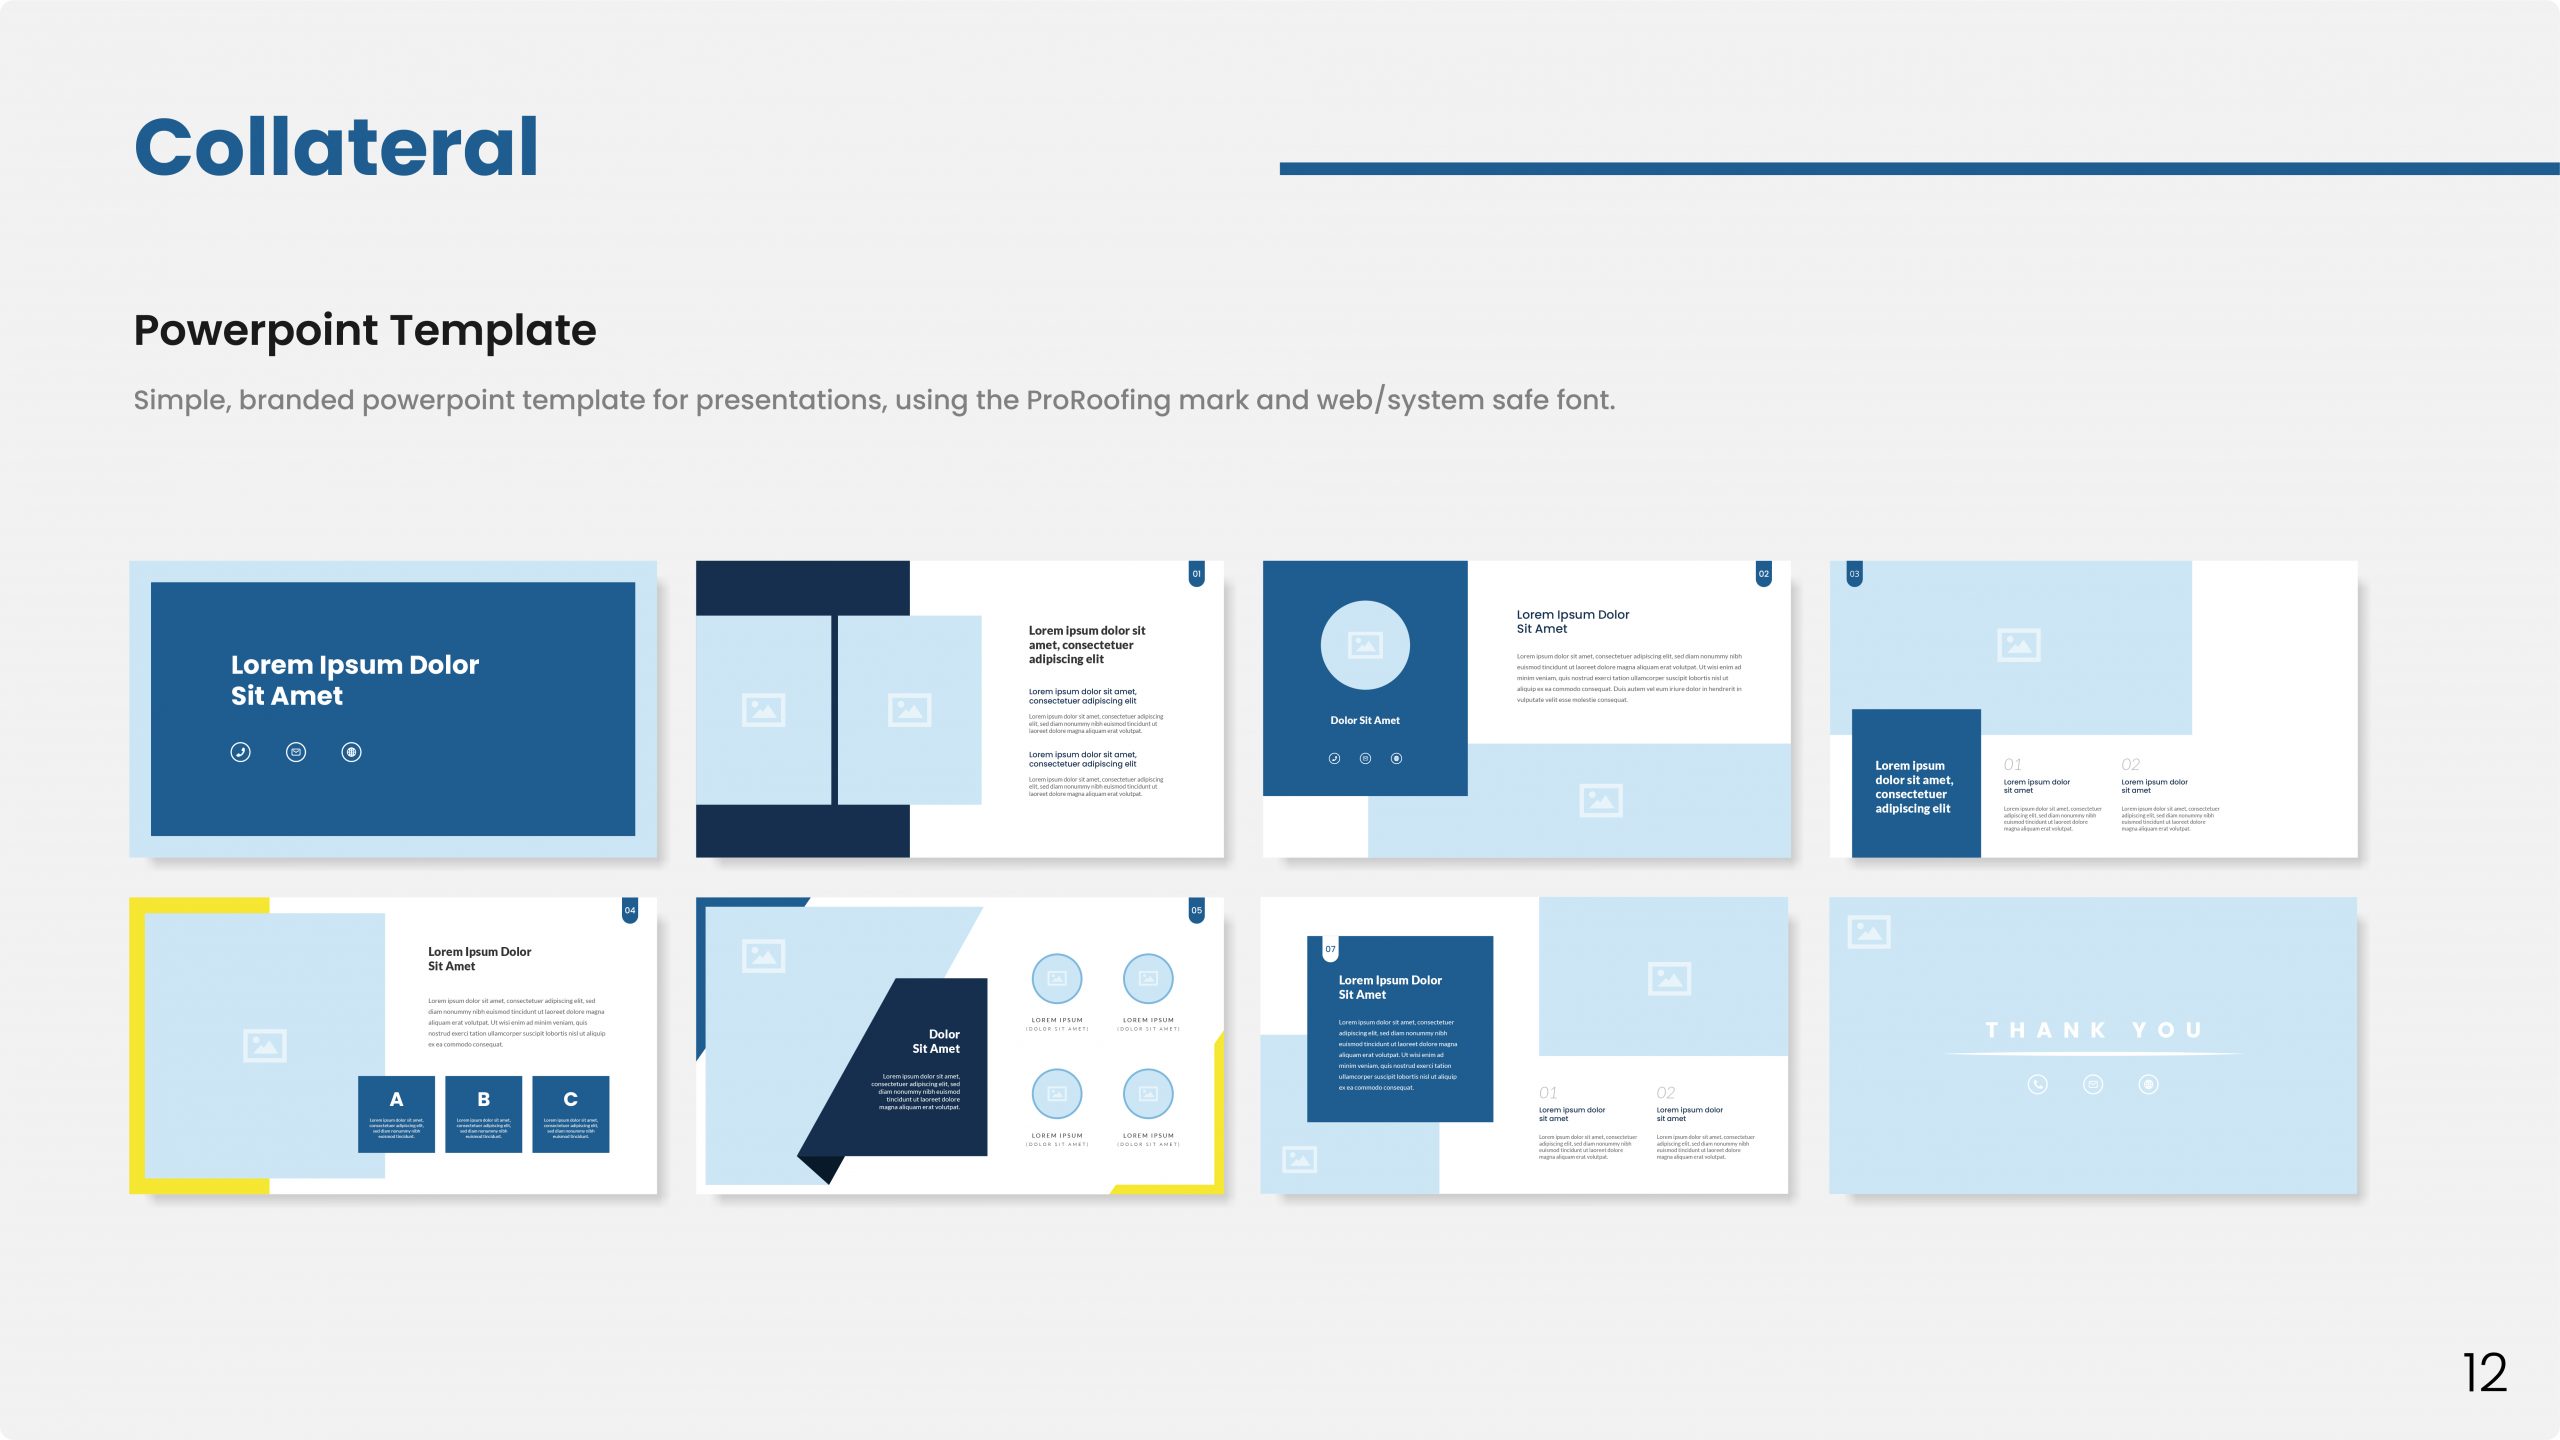 Pro Roofing - Pro roofing Brand Guidelines 14 scaled - New Minds Group